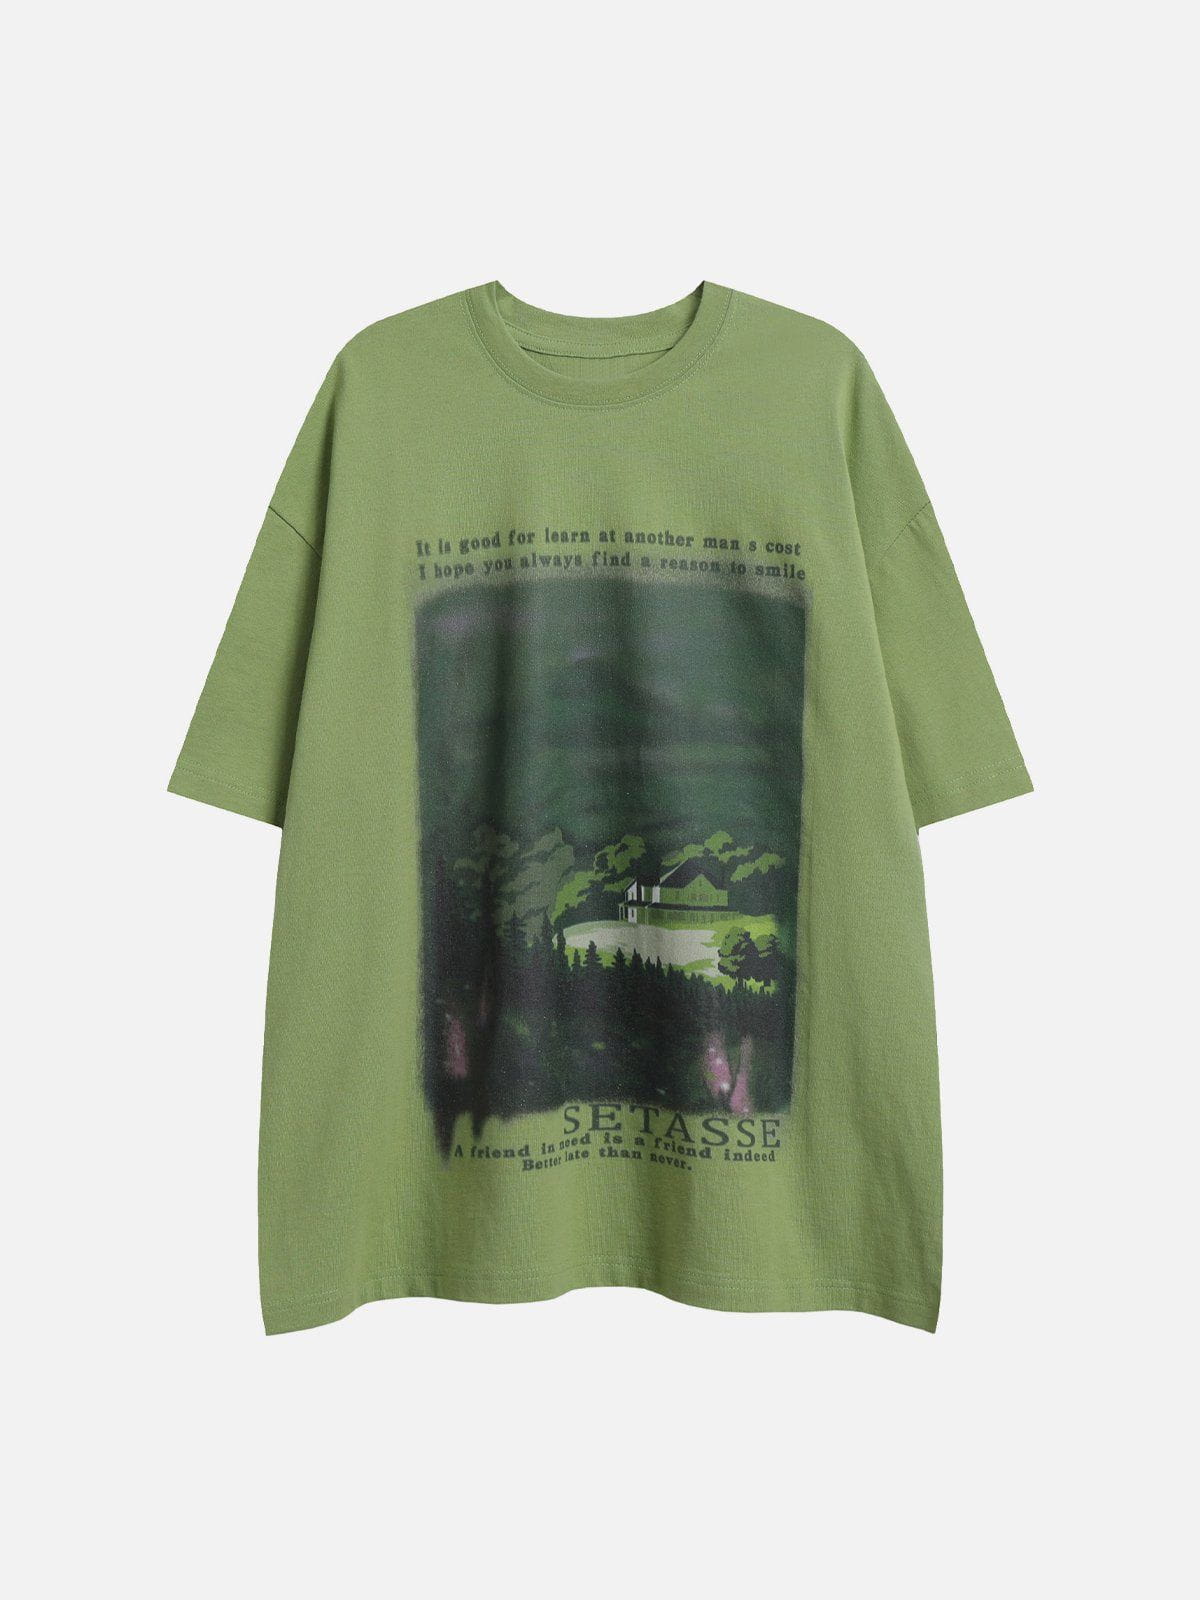 Sneakerland™ - Forest House Print Tee